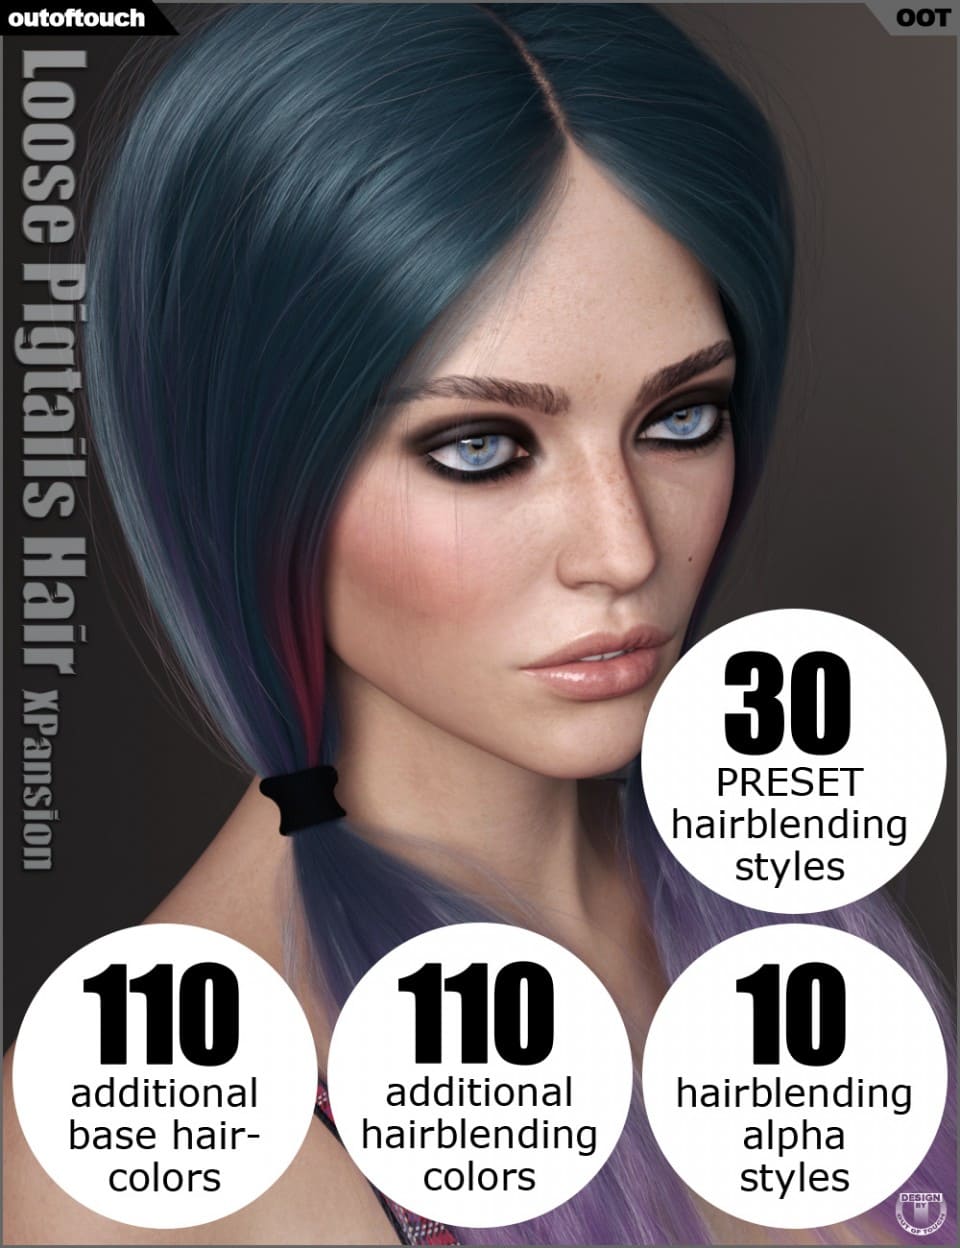 OOT Hairblending 2.0 Texture XPansion for Loose Pigtails Hair_DAZ3D下载站